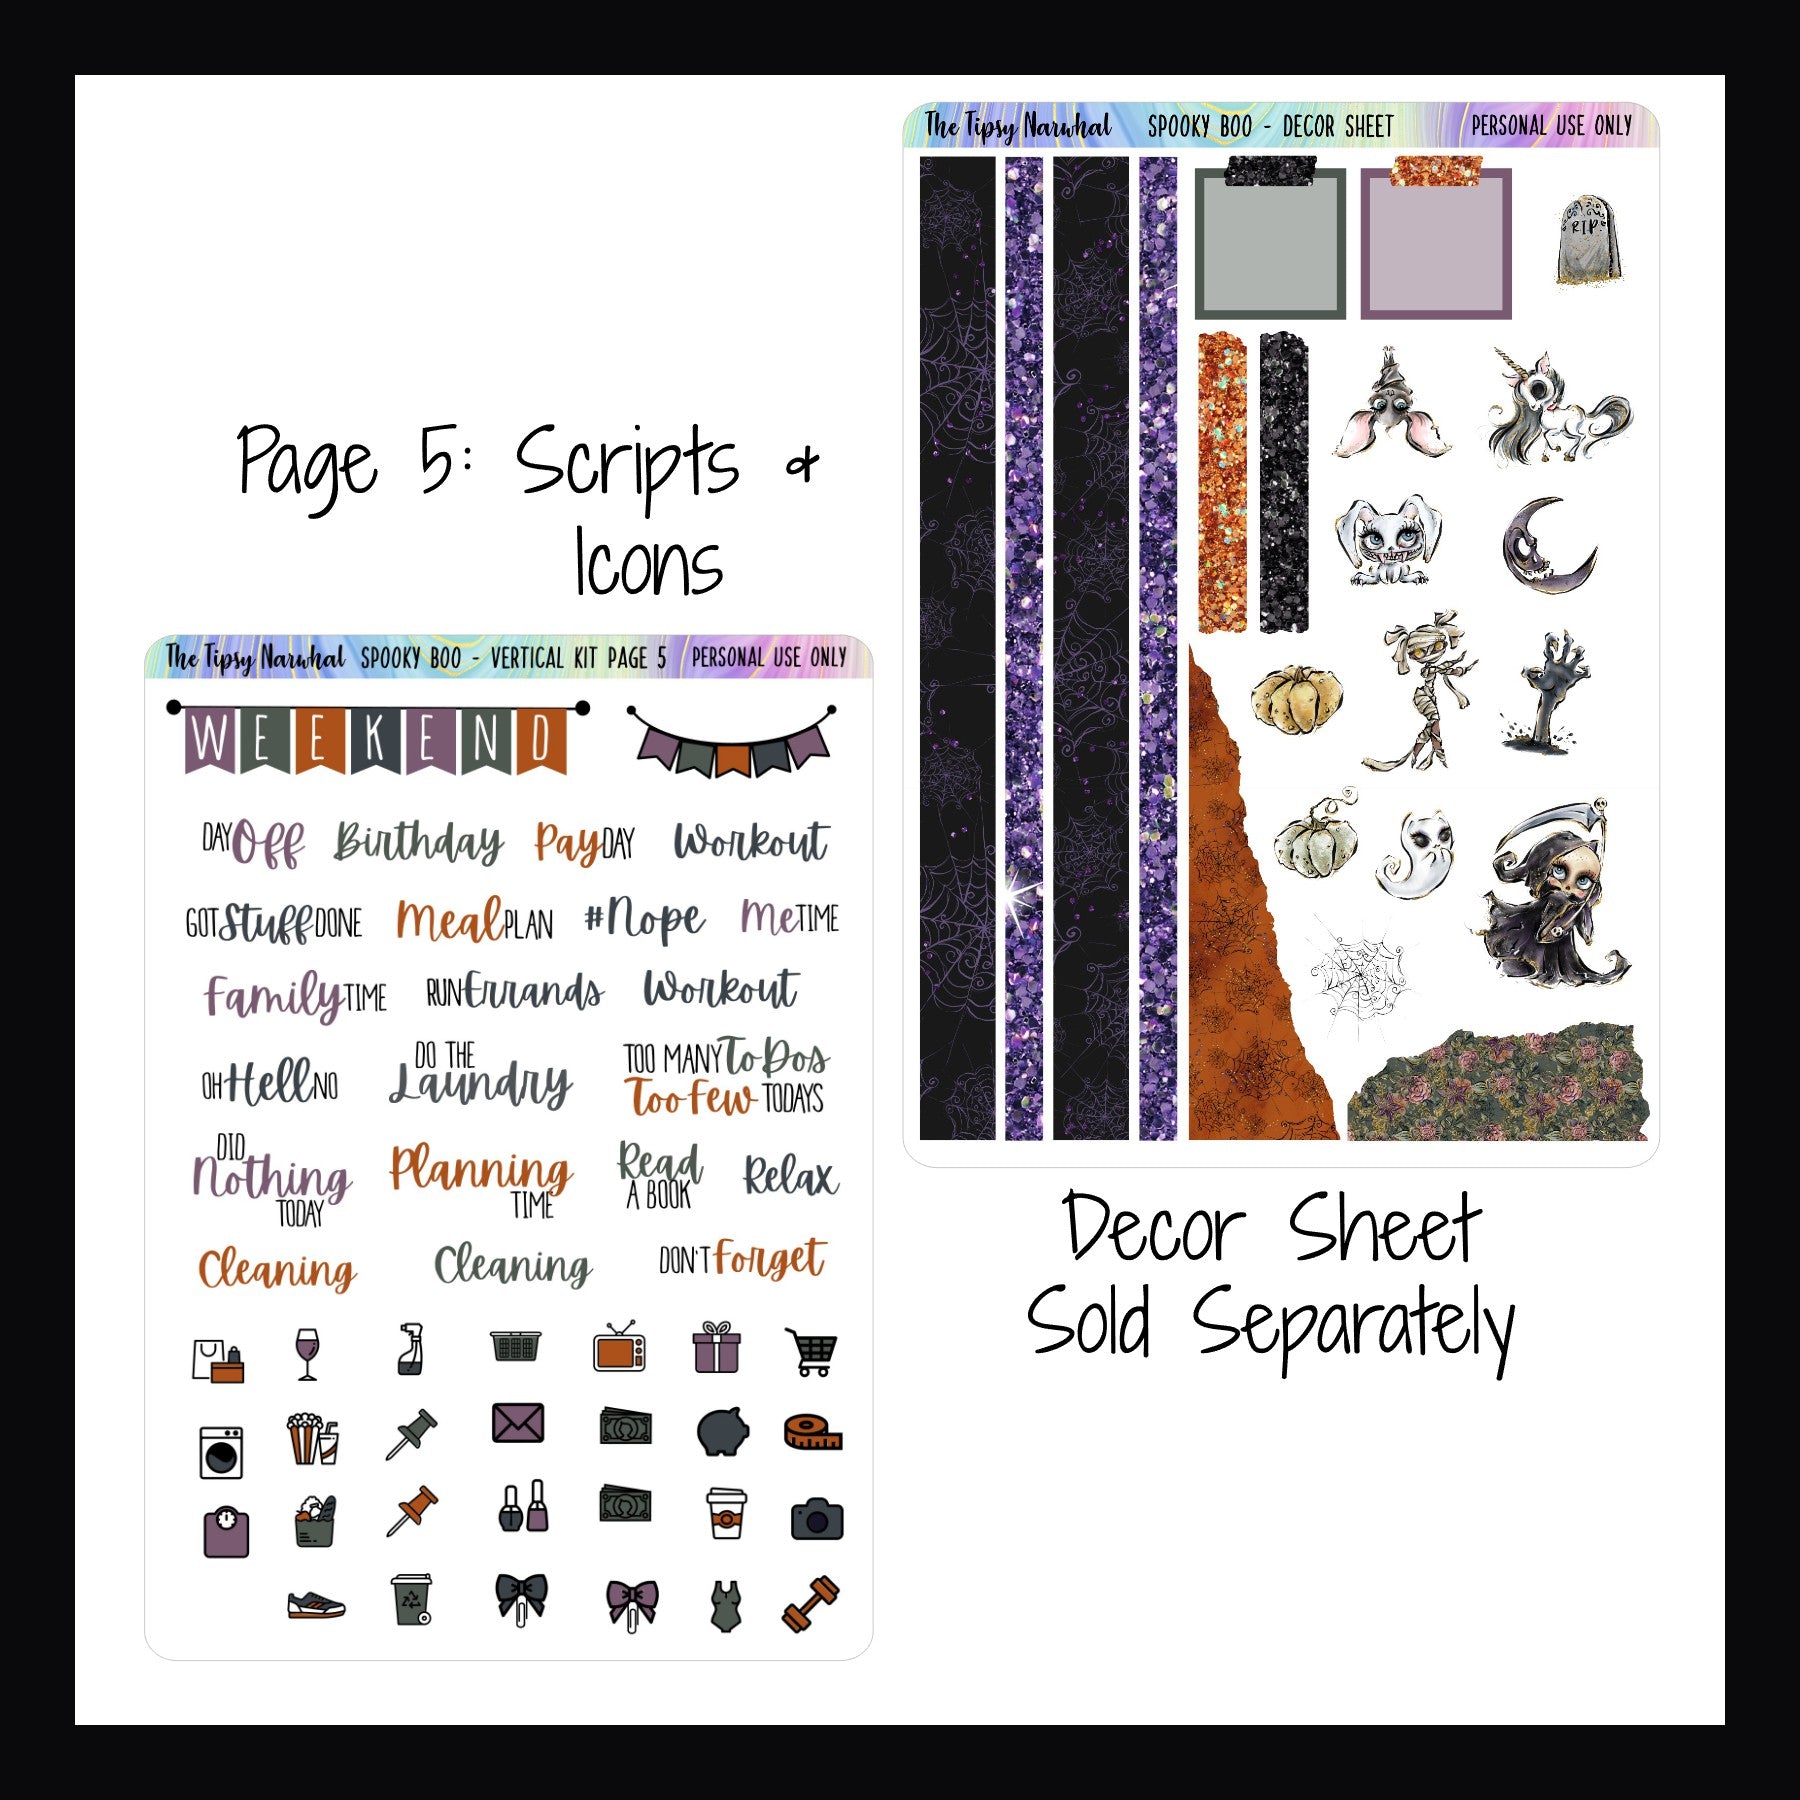 Spooky Boo Vertical Weekly kit page 5 and decor sheet, daily icon stickers, script stickers, weekend banner stickers, washi stickers, sticky note stickers, torn paper stickers, decorative stickers, creepy character stickers, zombie, grim reaper, bat, ghost, mummy, dead unicorn stickers. 